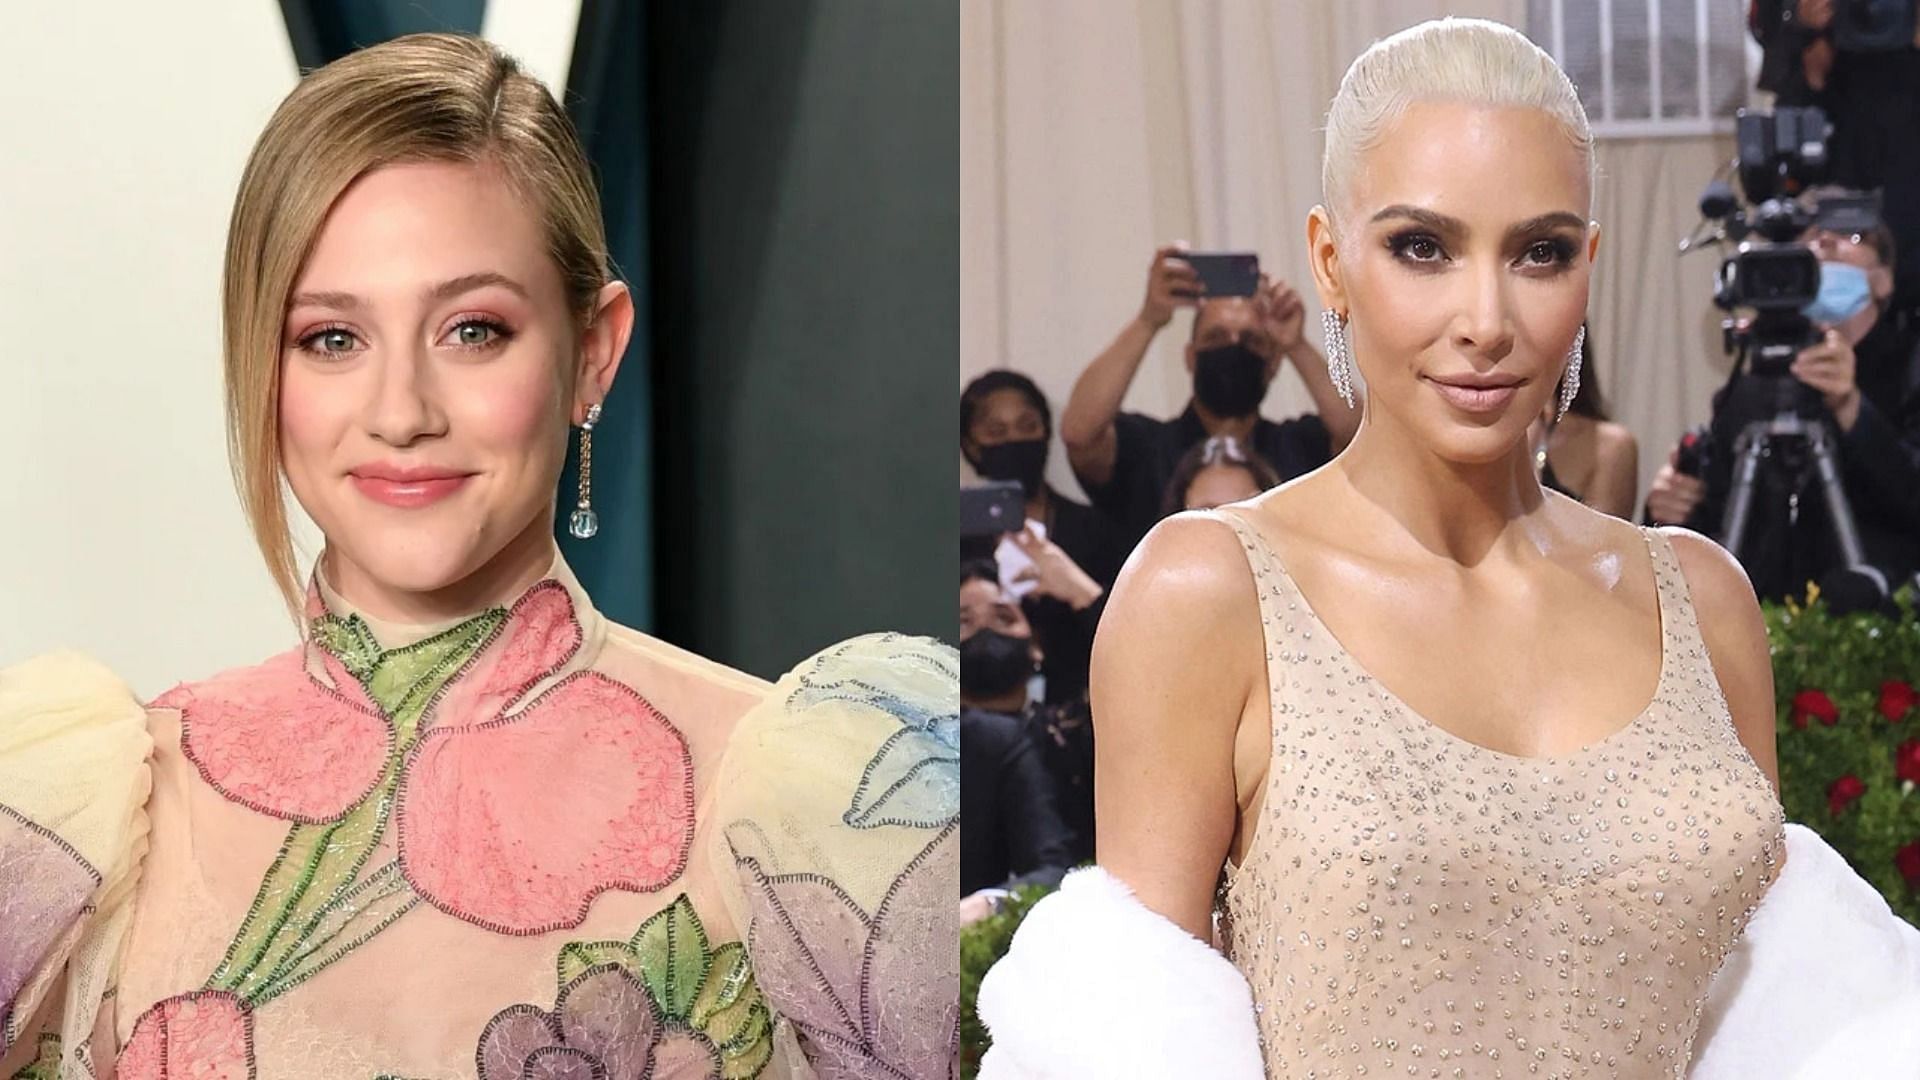 Lili Reinhart called Kim Kardashian stupid for her strict diet to fit into a dress. (Image via Getty Images/Karwai Tang/Taylor Hill)